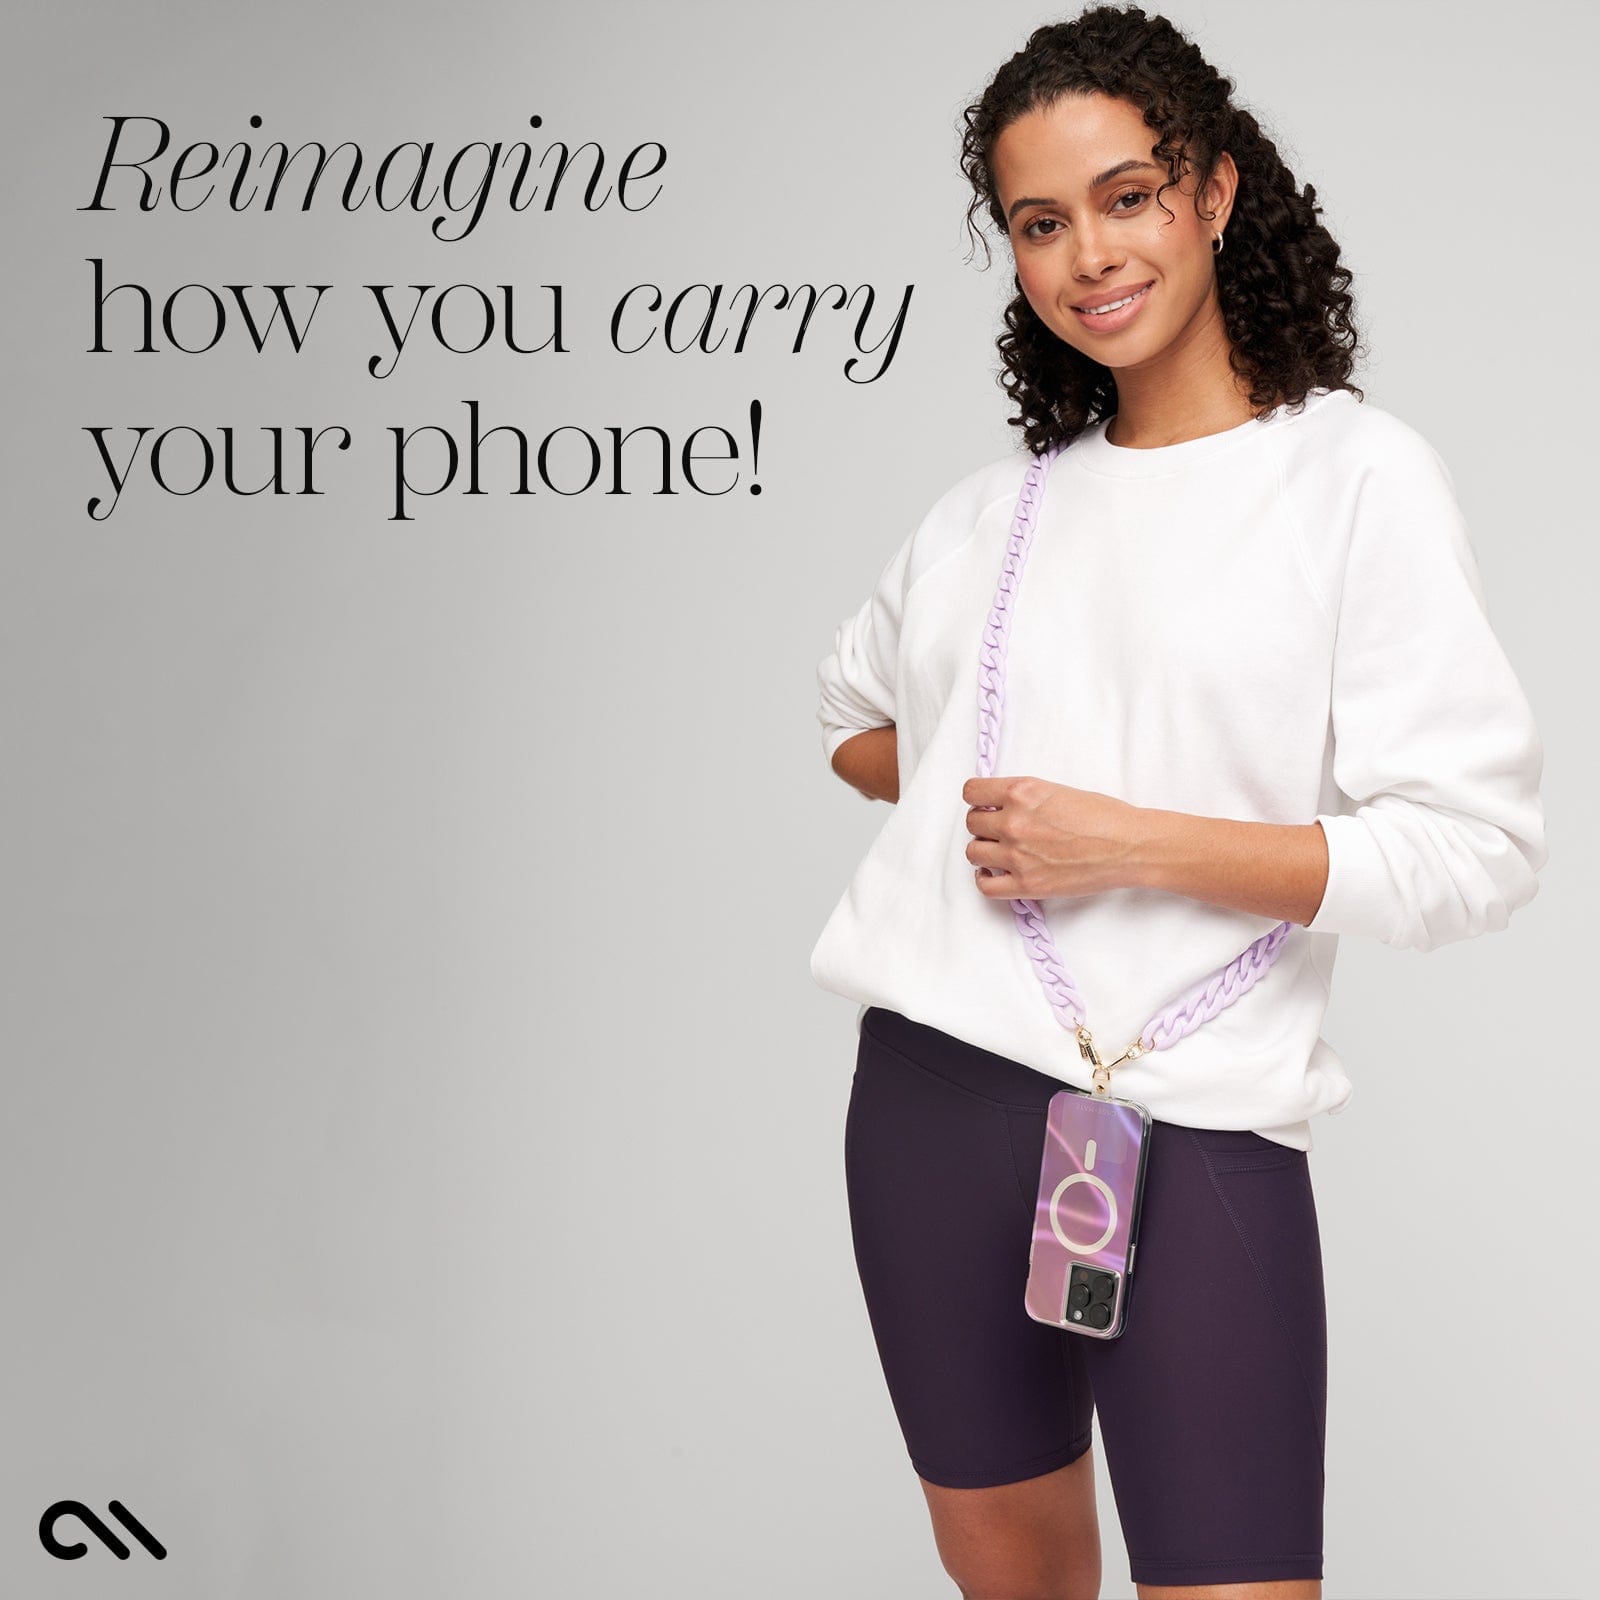 REIMAGINE HOW YOUR CARRY YOUR PHONE!